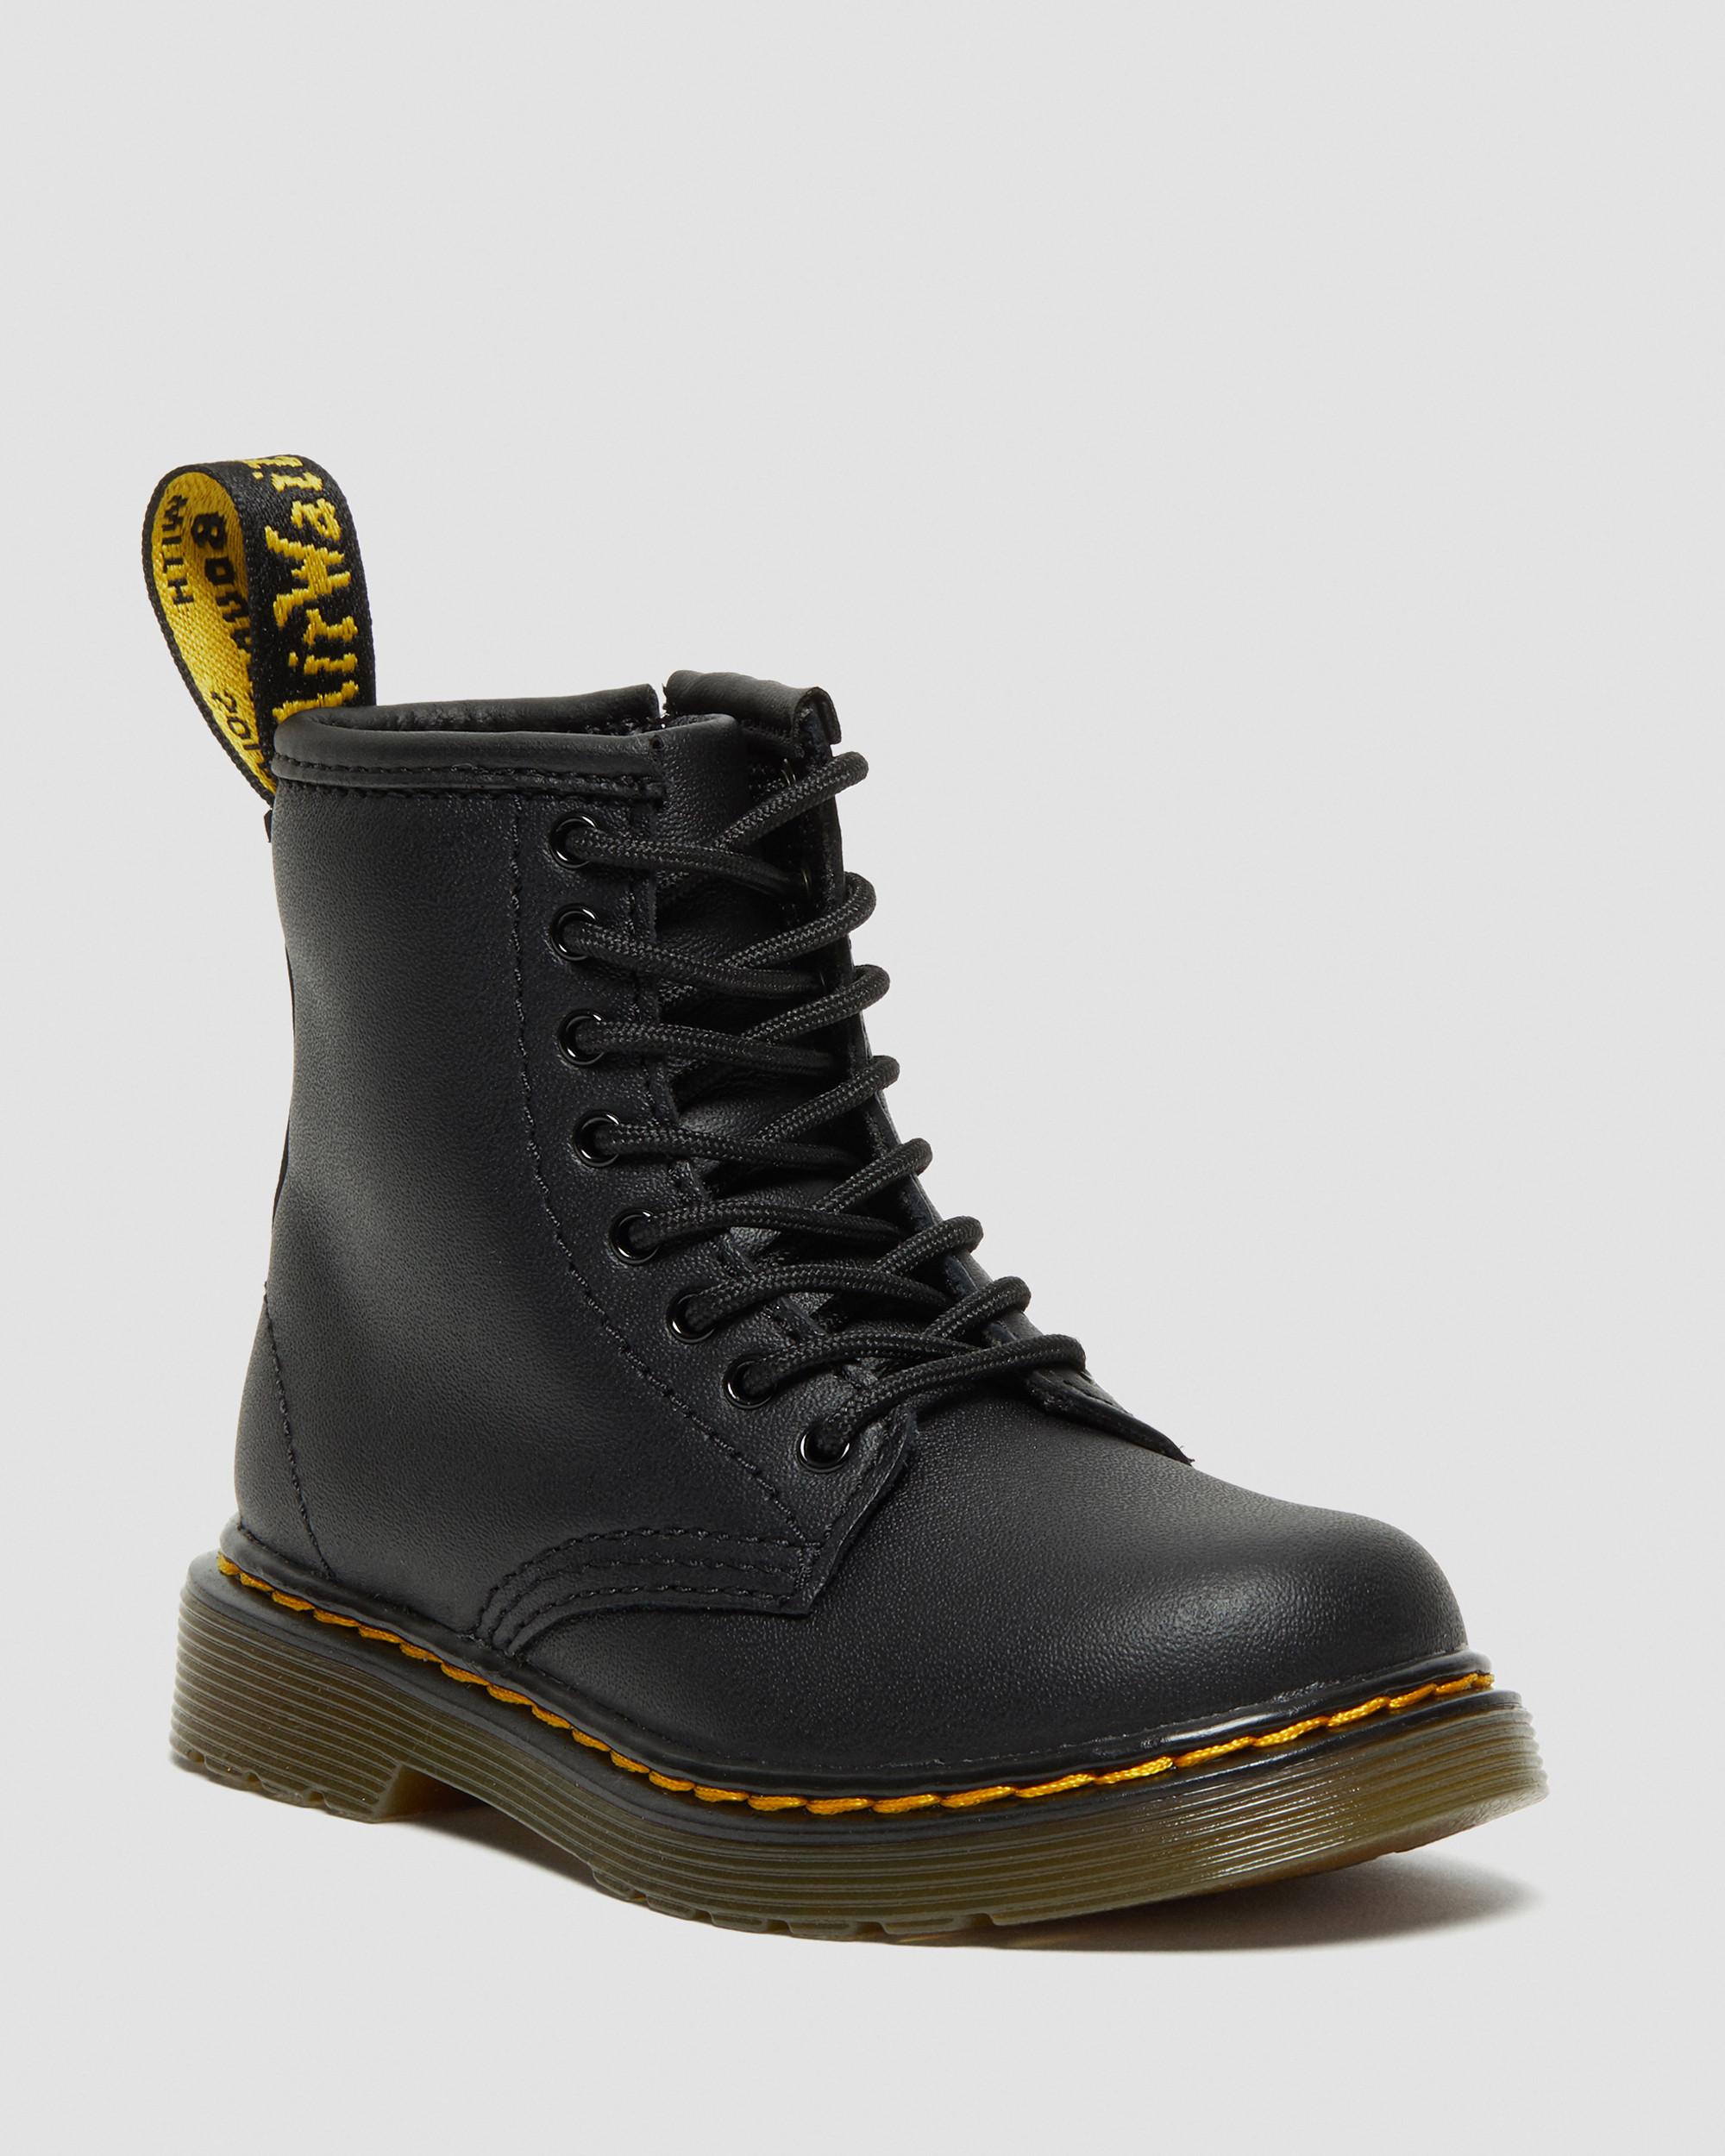 Toddler 1460 Softy T Leather Lace Up Boots in Black | Dr. Martens